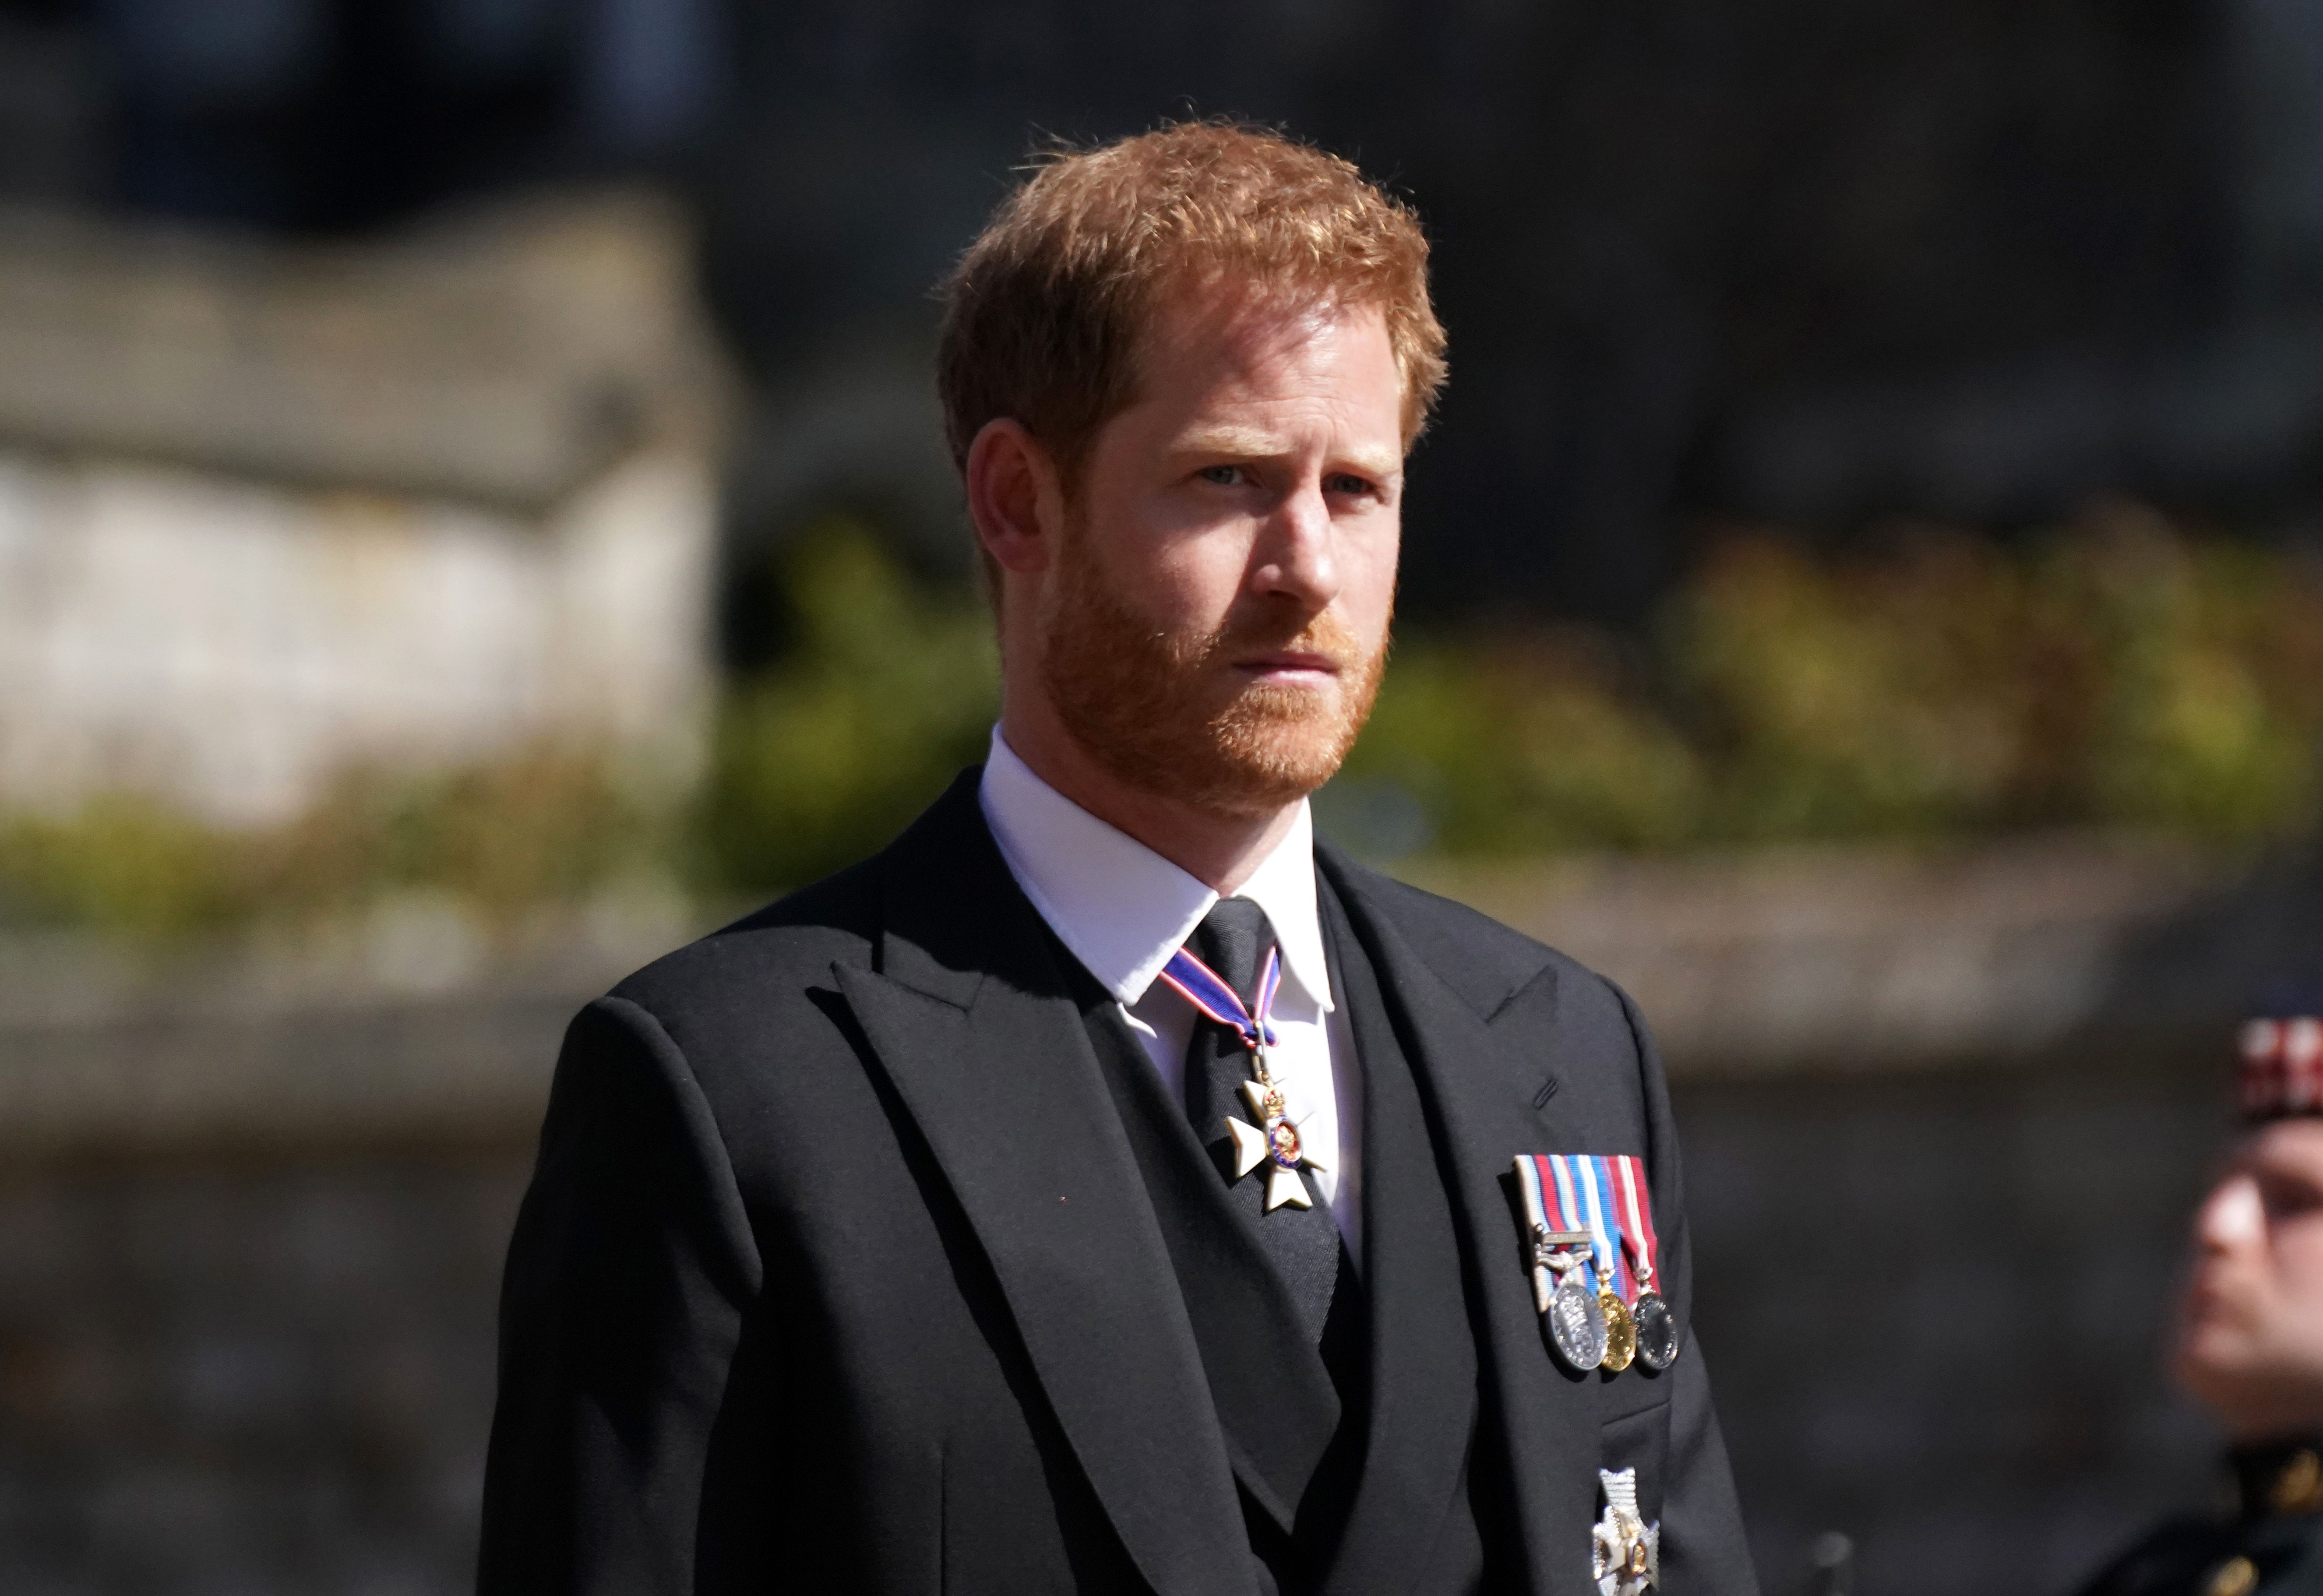 Prince Harry appears at an event.